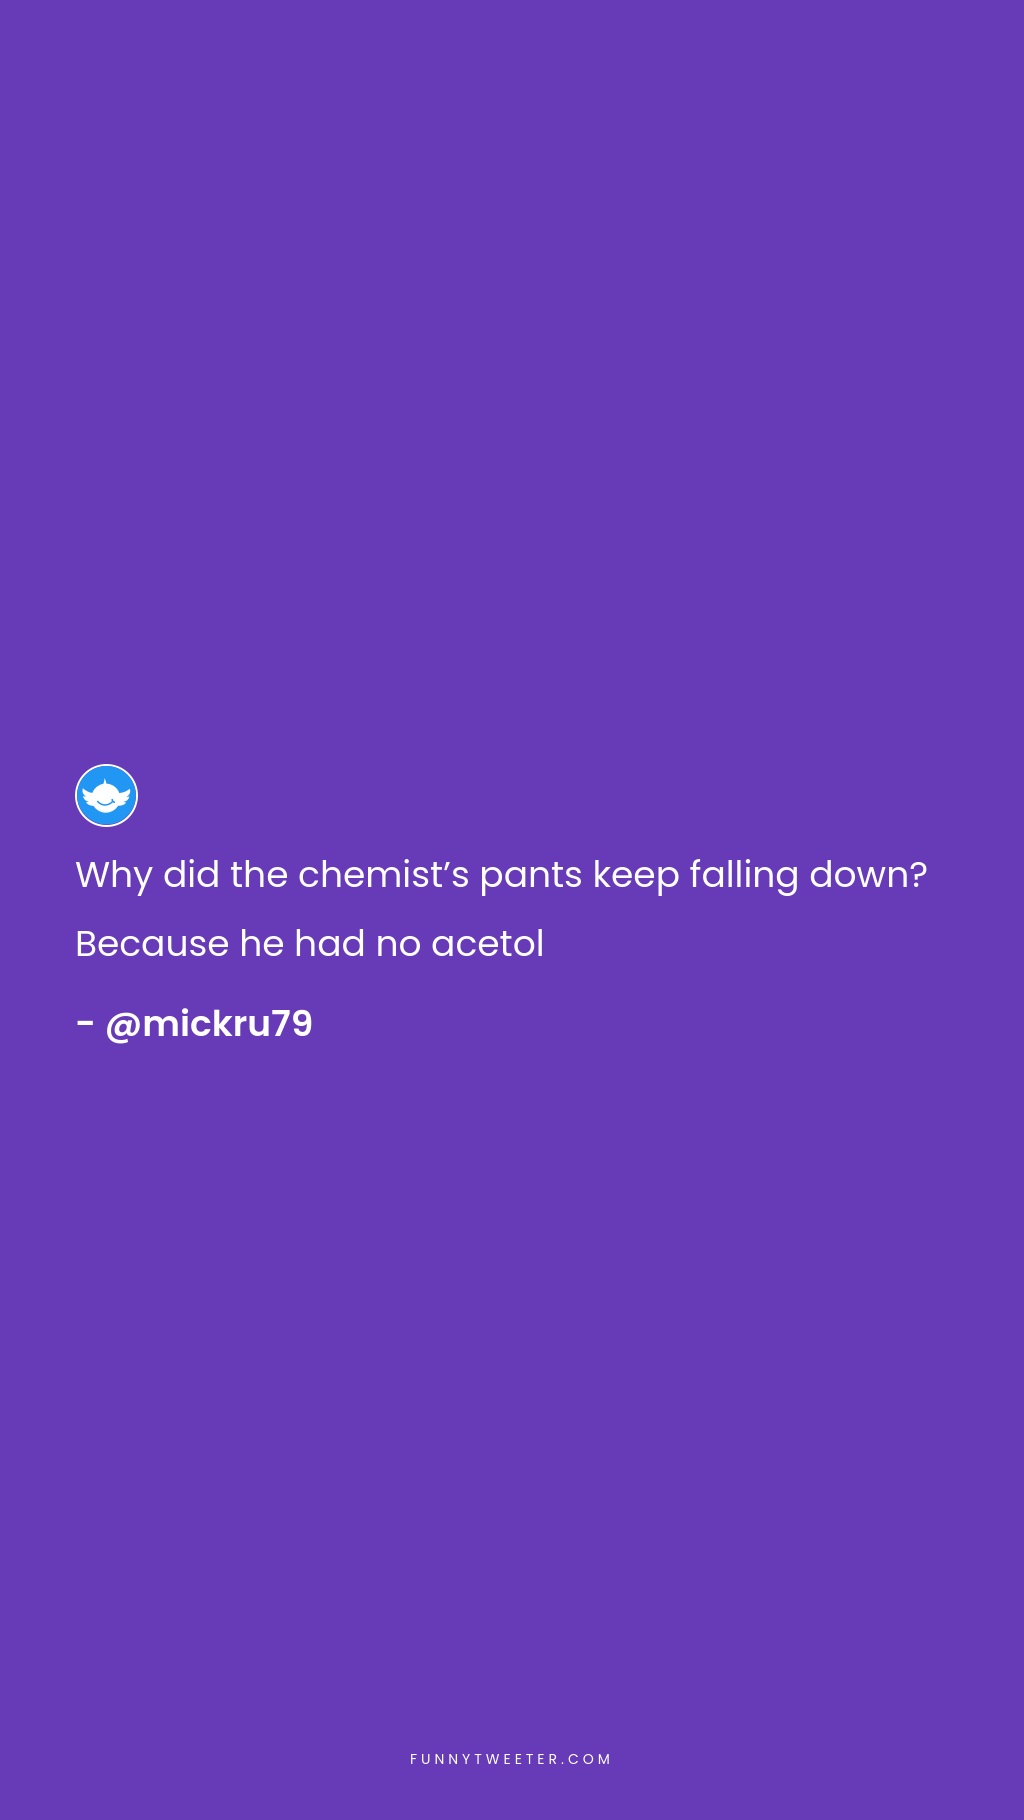 Why did the chemist's pants keep falling down? Because he had no